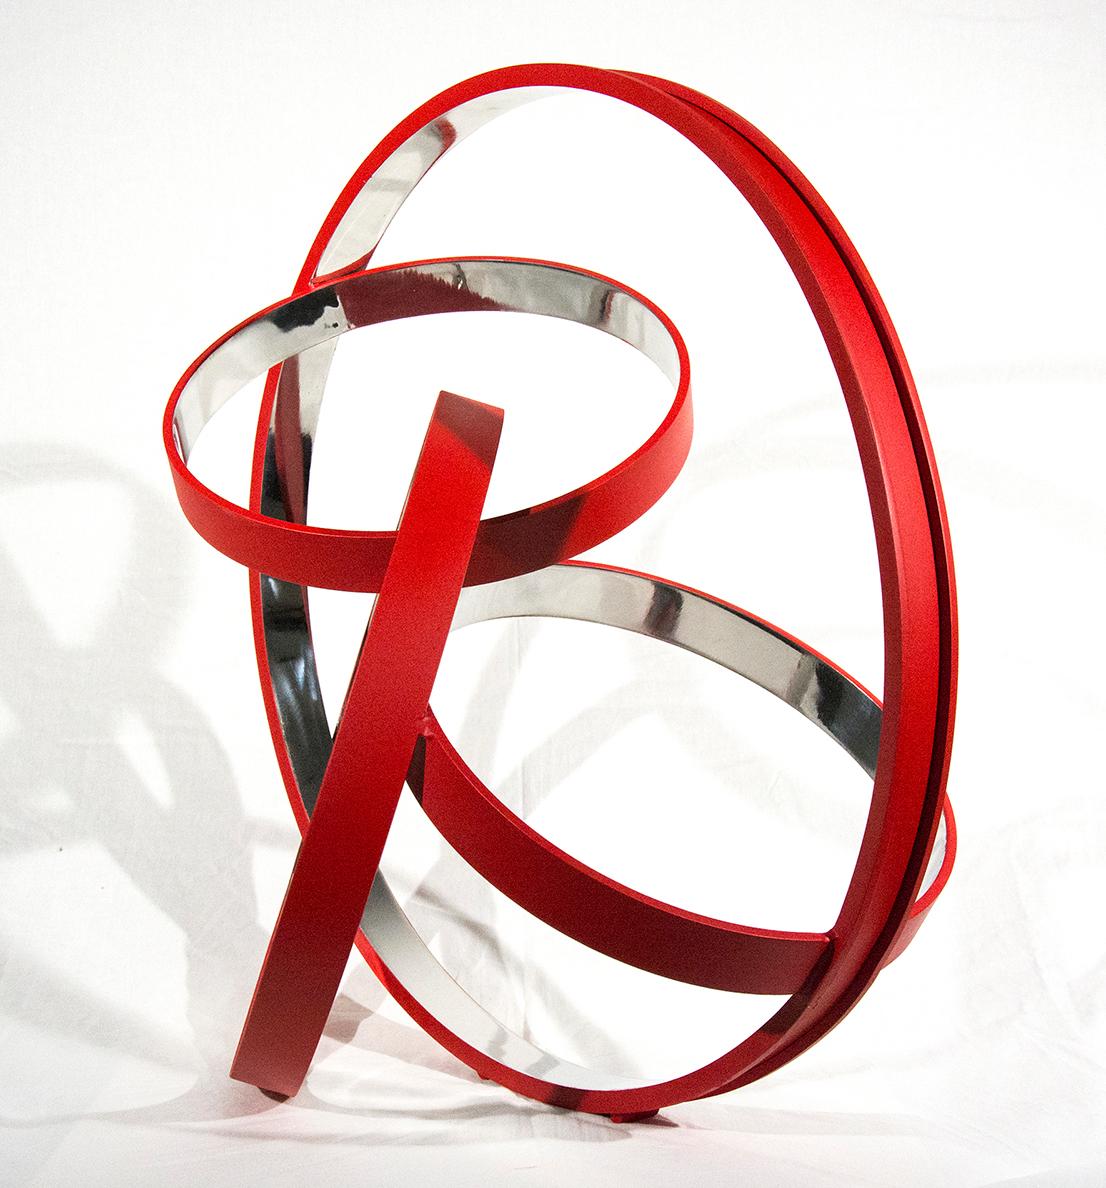 Four Ring Temps Zero Red 6/10 - modern, abstract, stainless steel sculpture - Sculpture by Philippe Pallafray